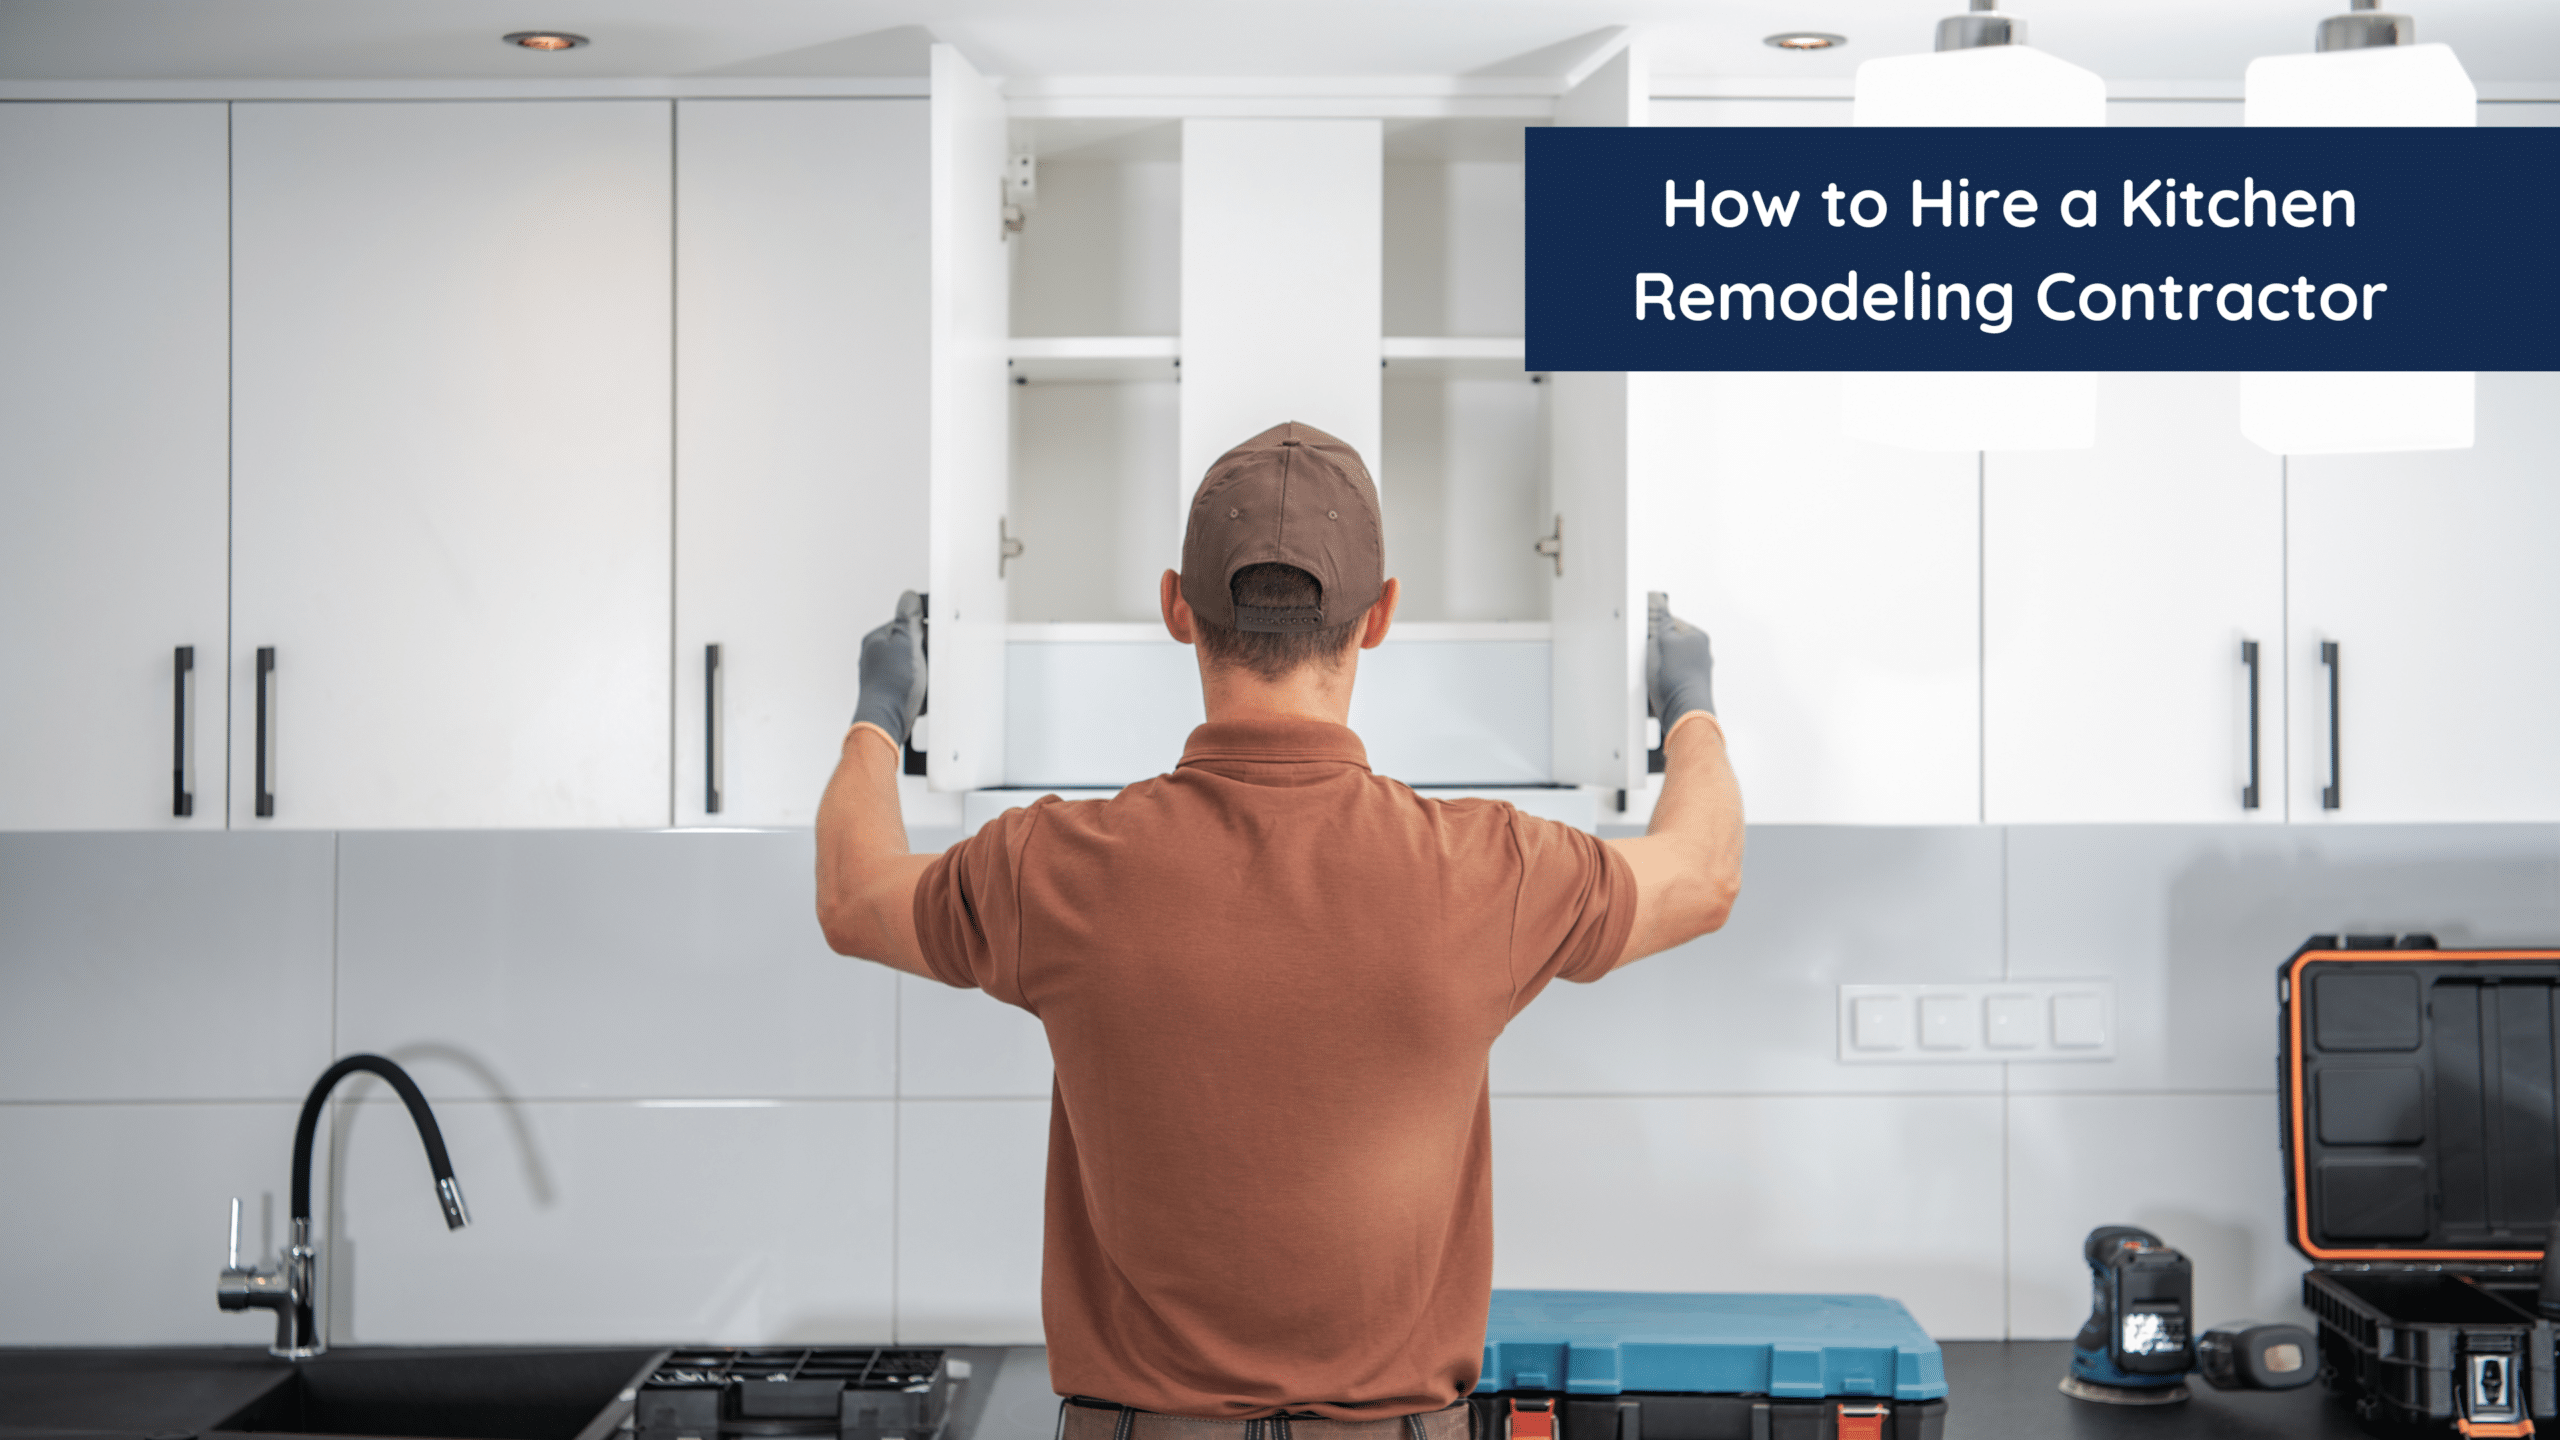 Working With a Kitchen Remodeling Contractor